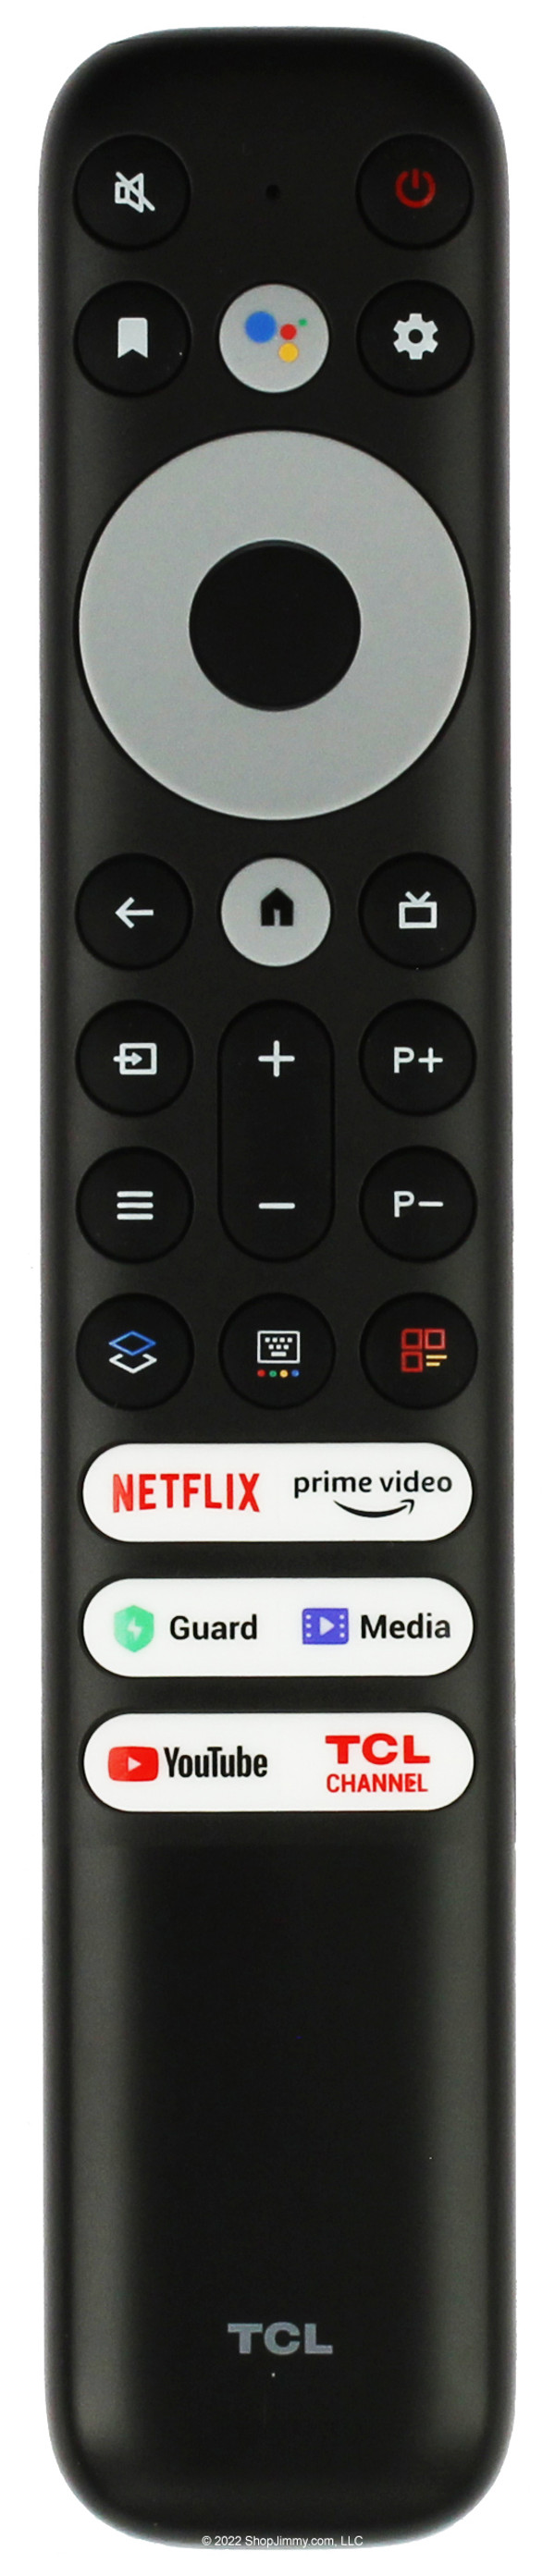 TCL RC902V 21001-000025 Voice Remote Control for Google/Android Smart TVs Open Bag/ORIGINAL